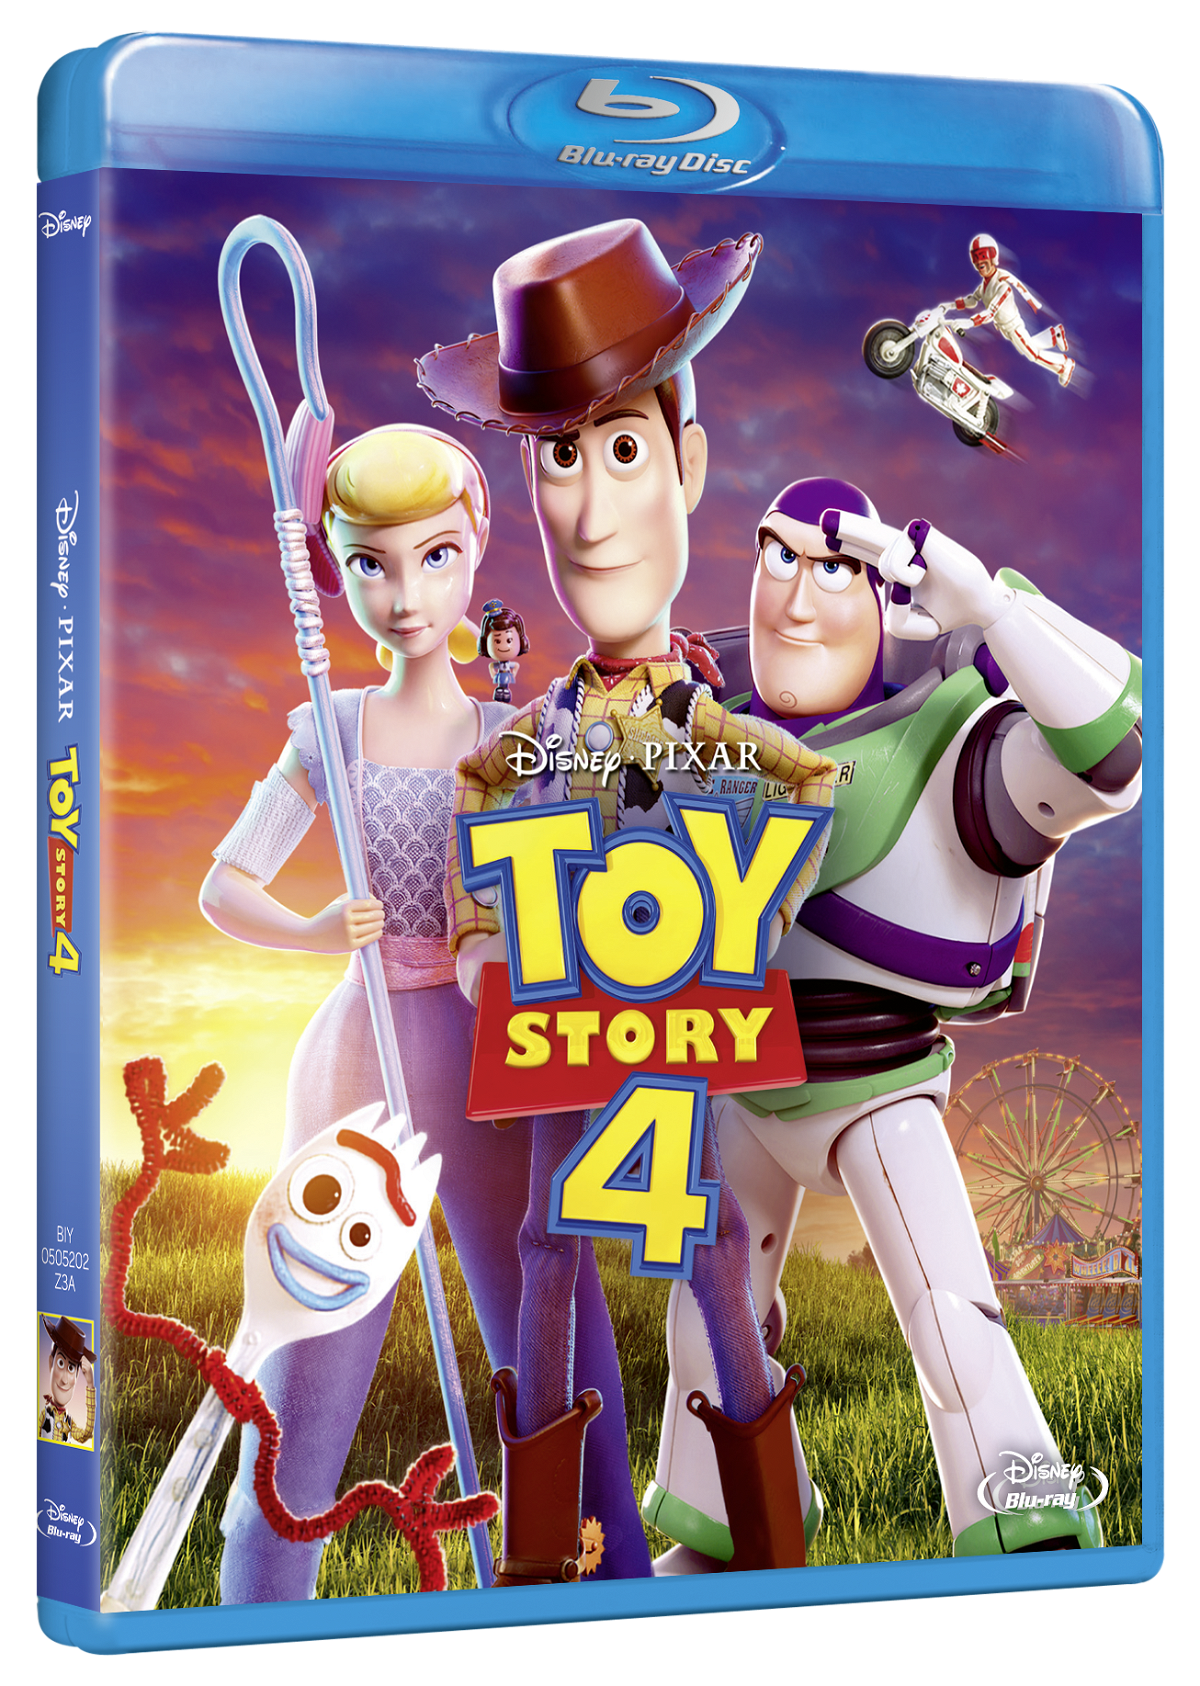 Toy Story 4 arriva in Home Video in diversi formati